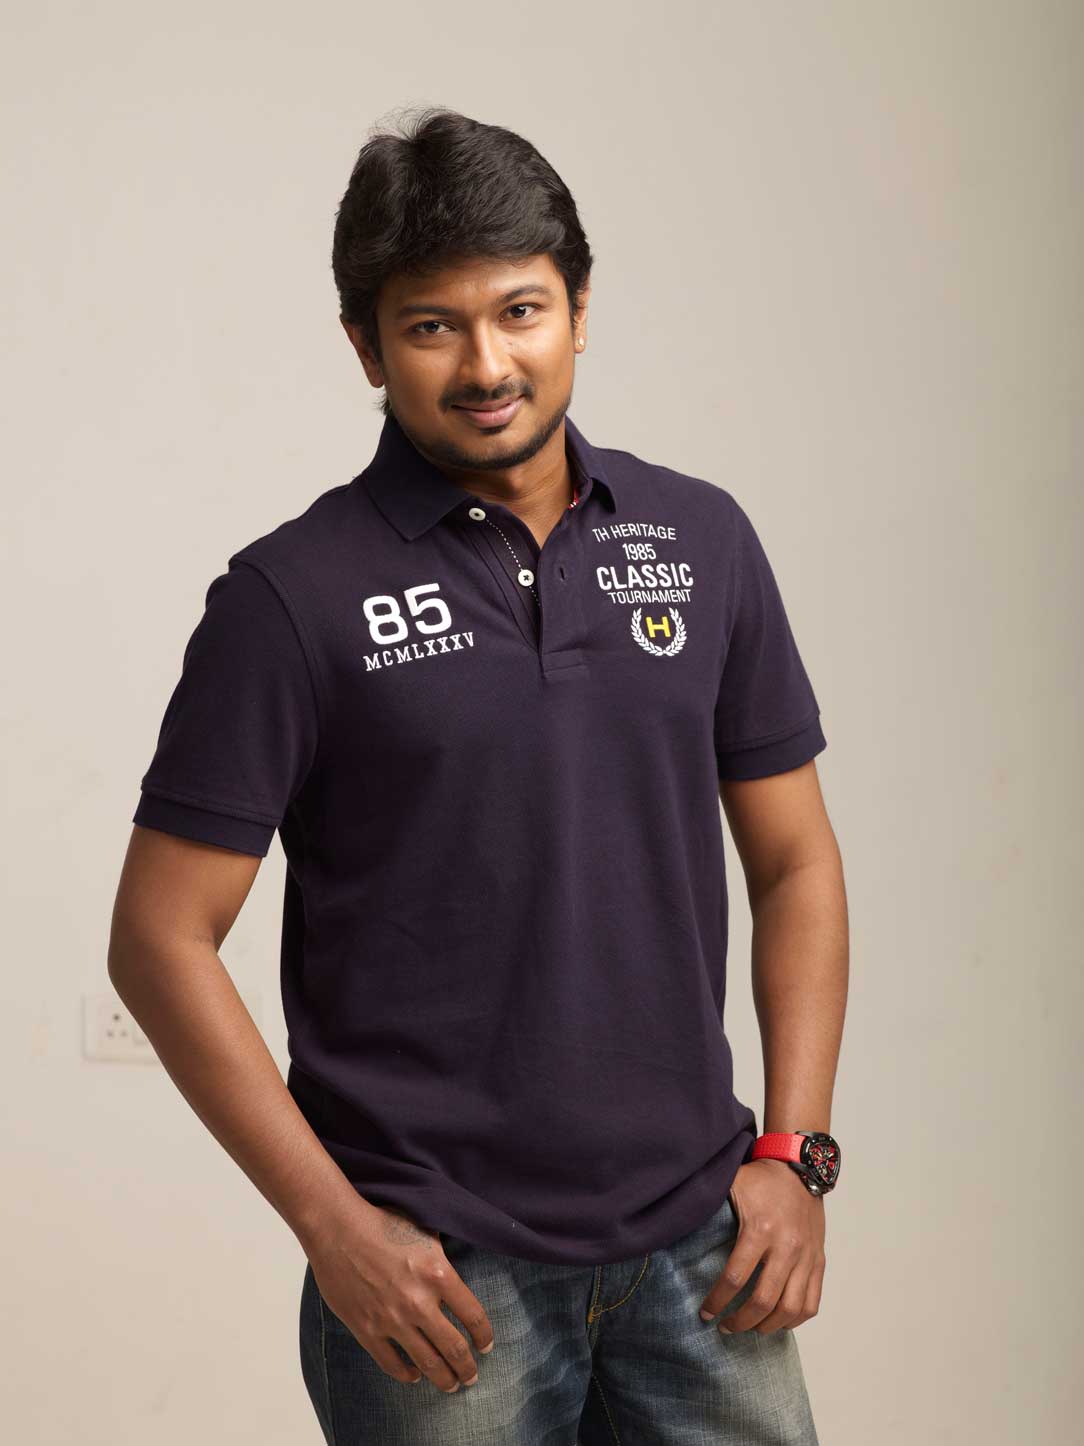 Actor Udhayanidhi Stalin Most Stylish Photos Images ...